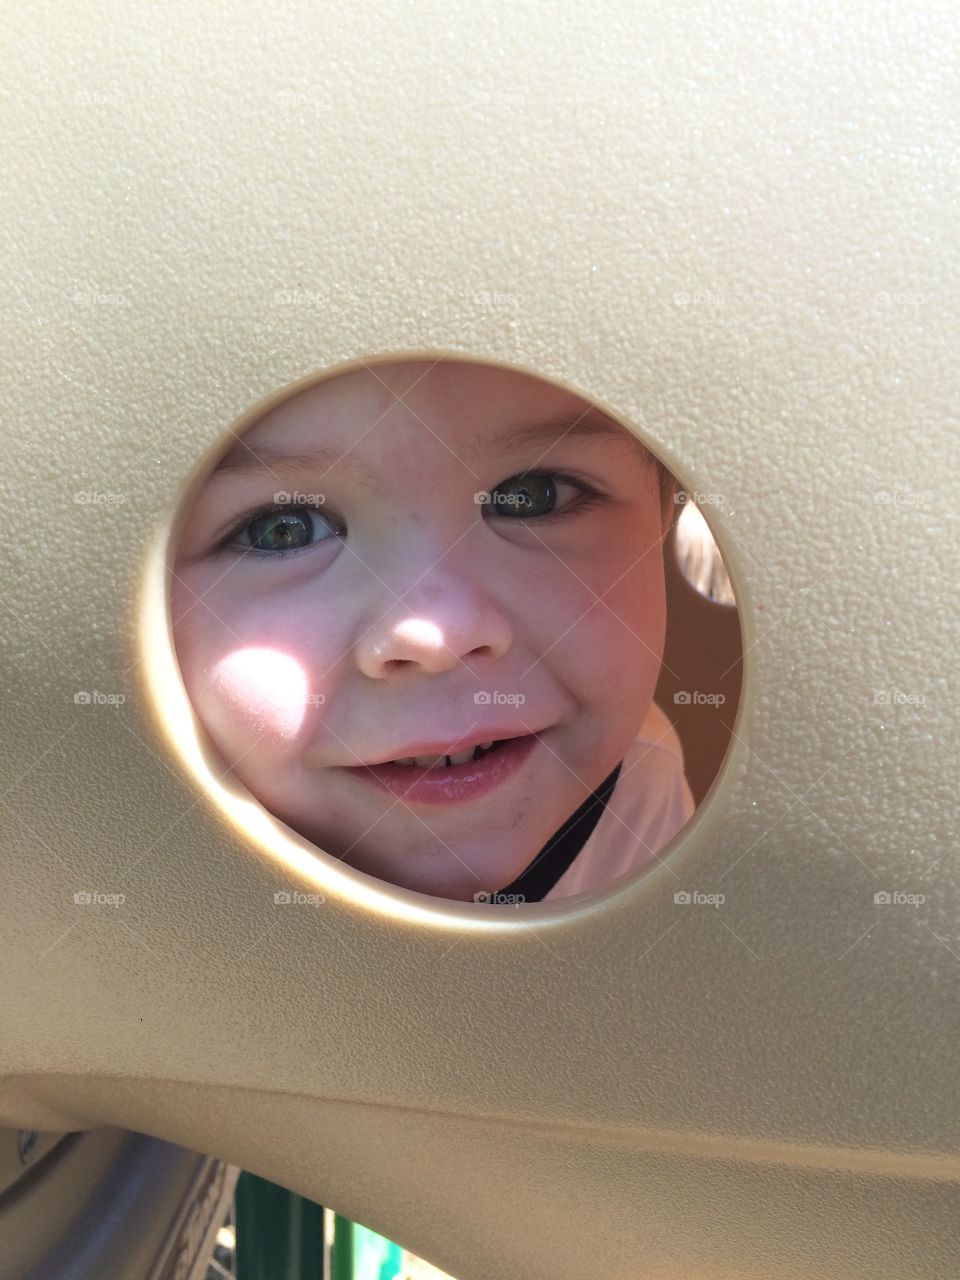 Peek a boo, I see you! Playing at the park with your toddler.